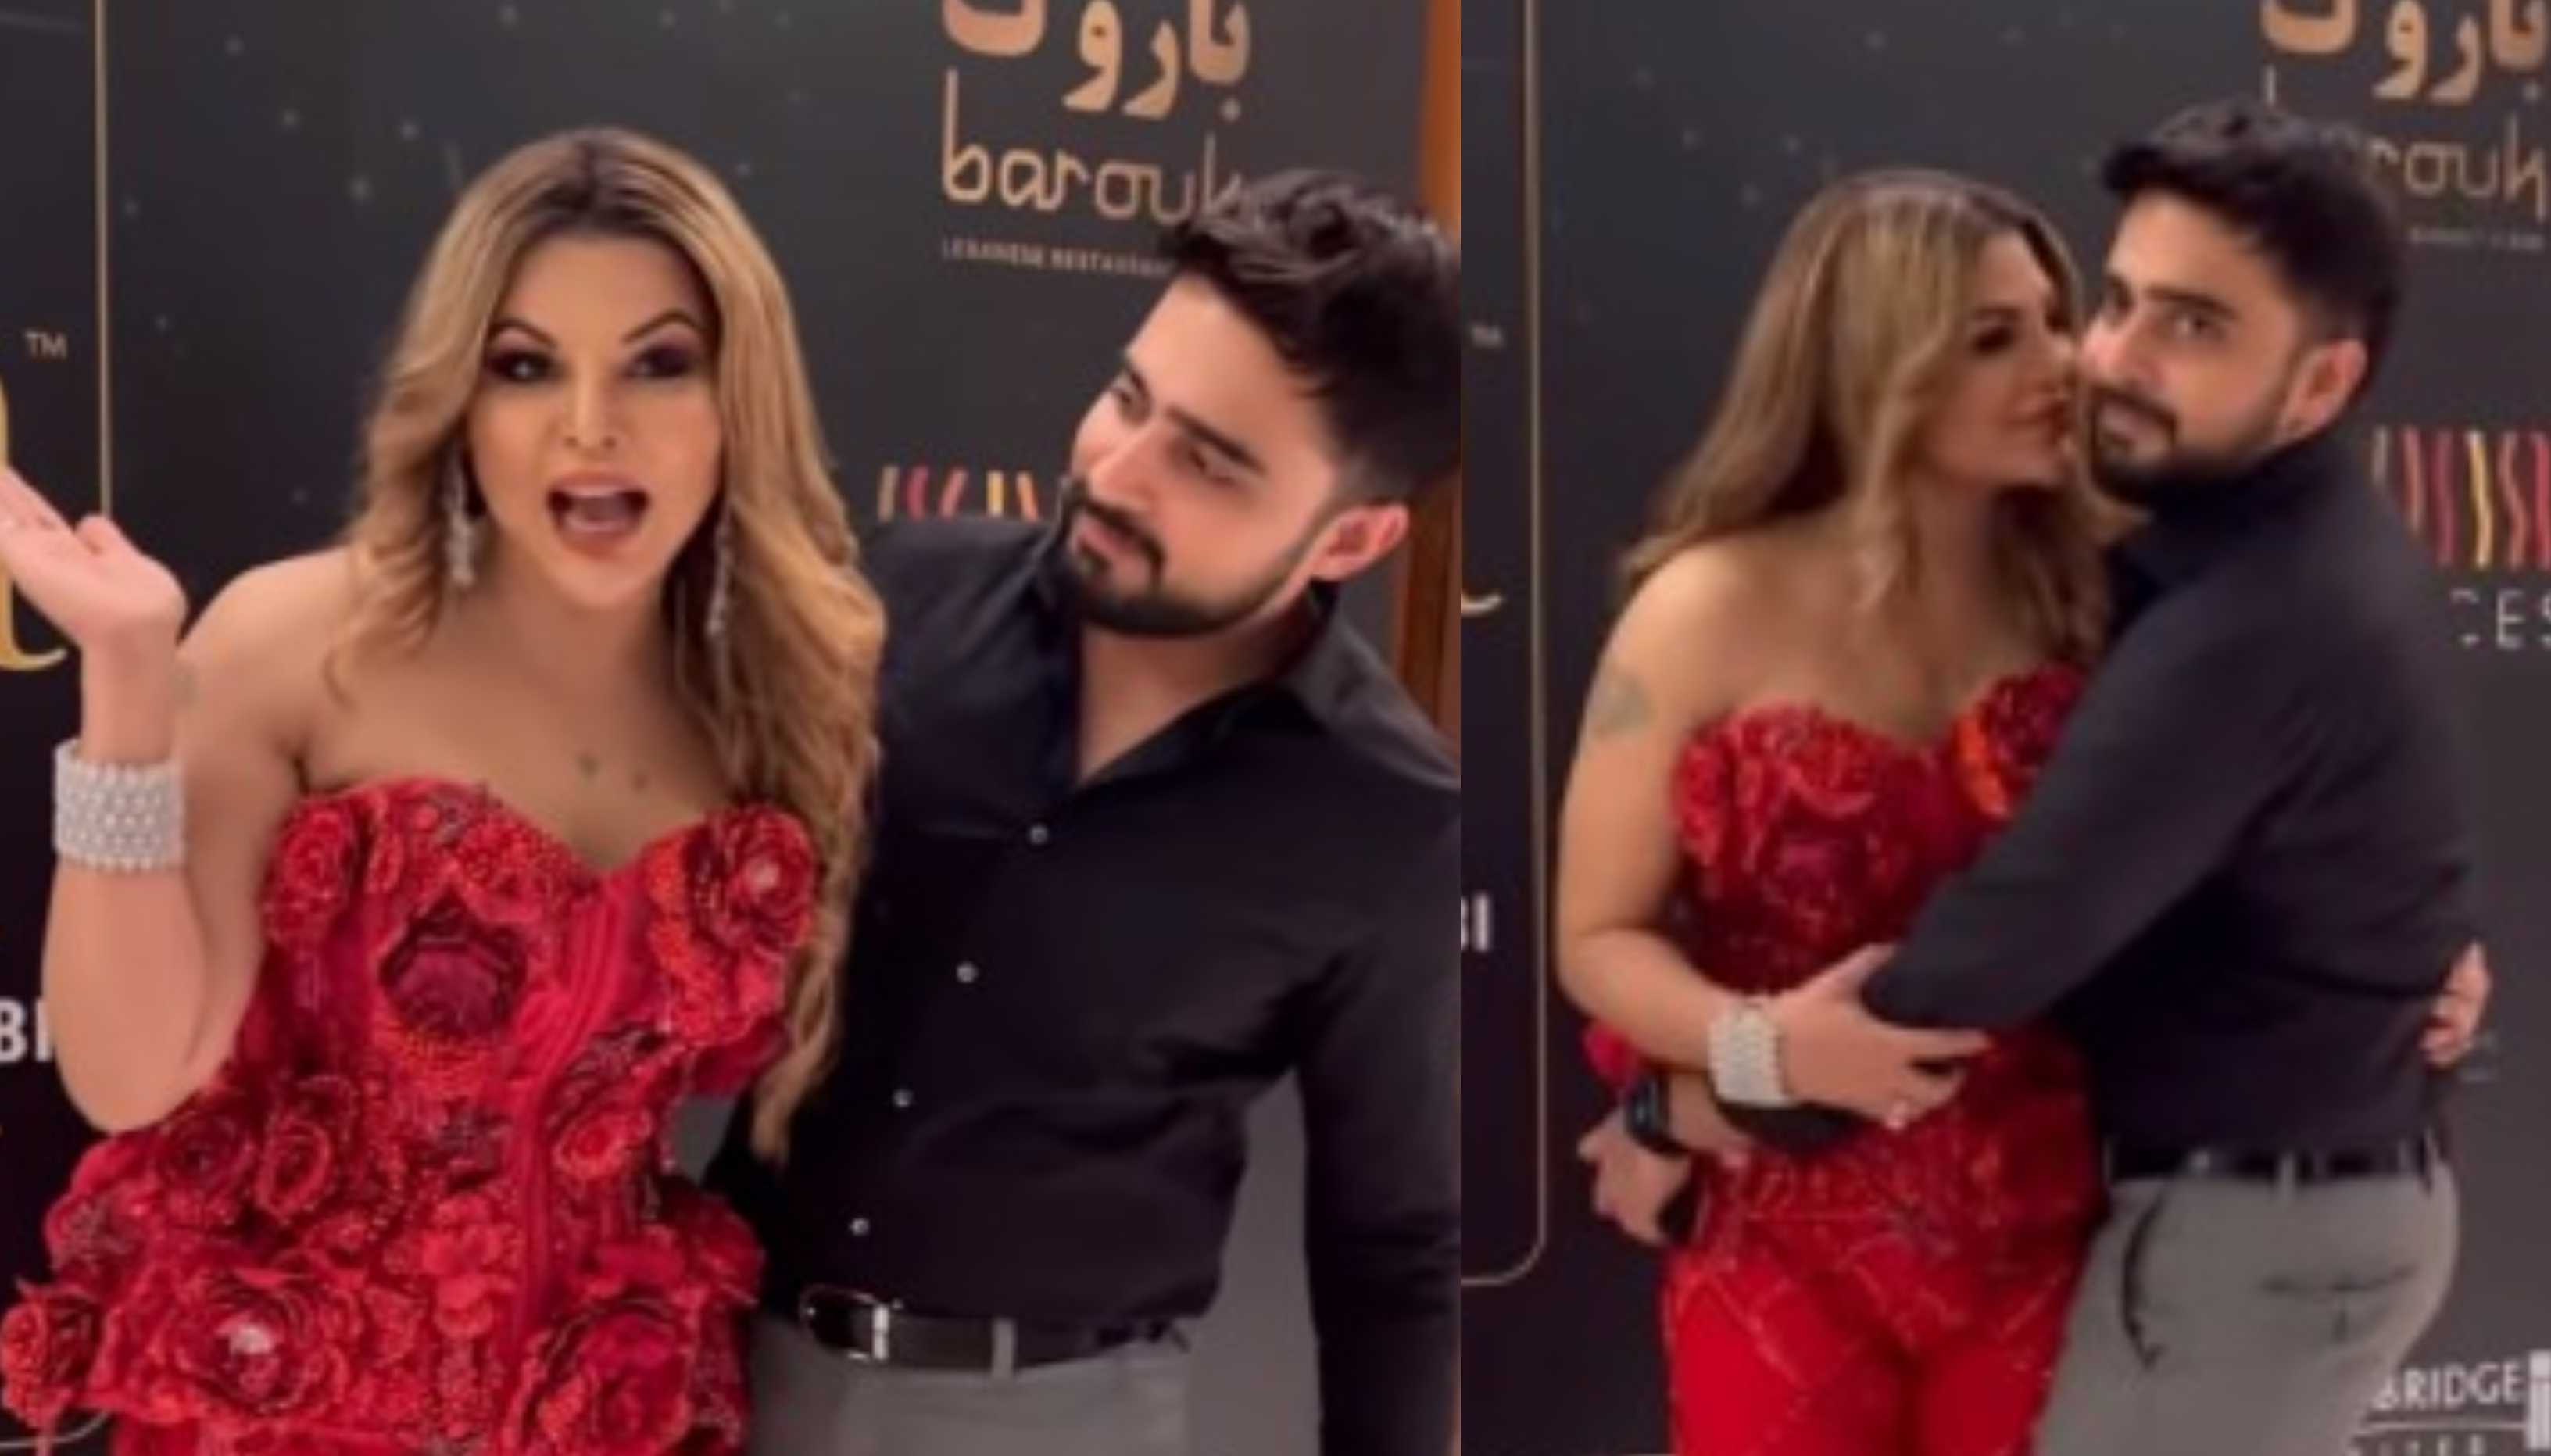 Rakhi Sawant’s boyfriend Adil claims she dropped by unannounced to see him in Bengaluru; here’s why he refused to meet her